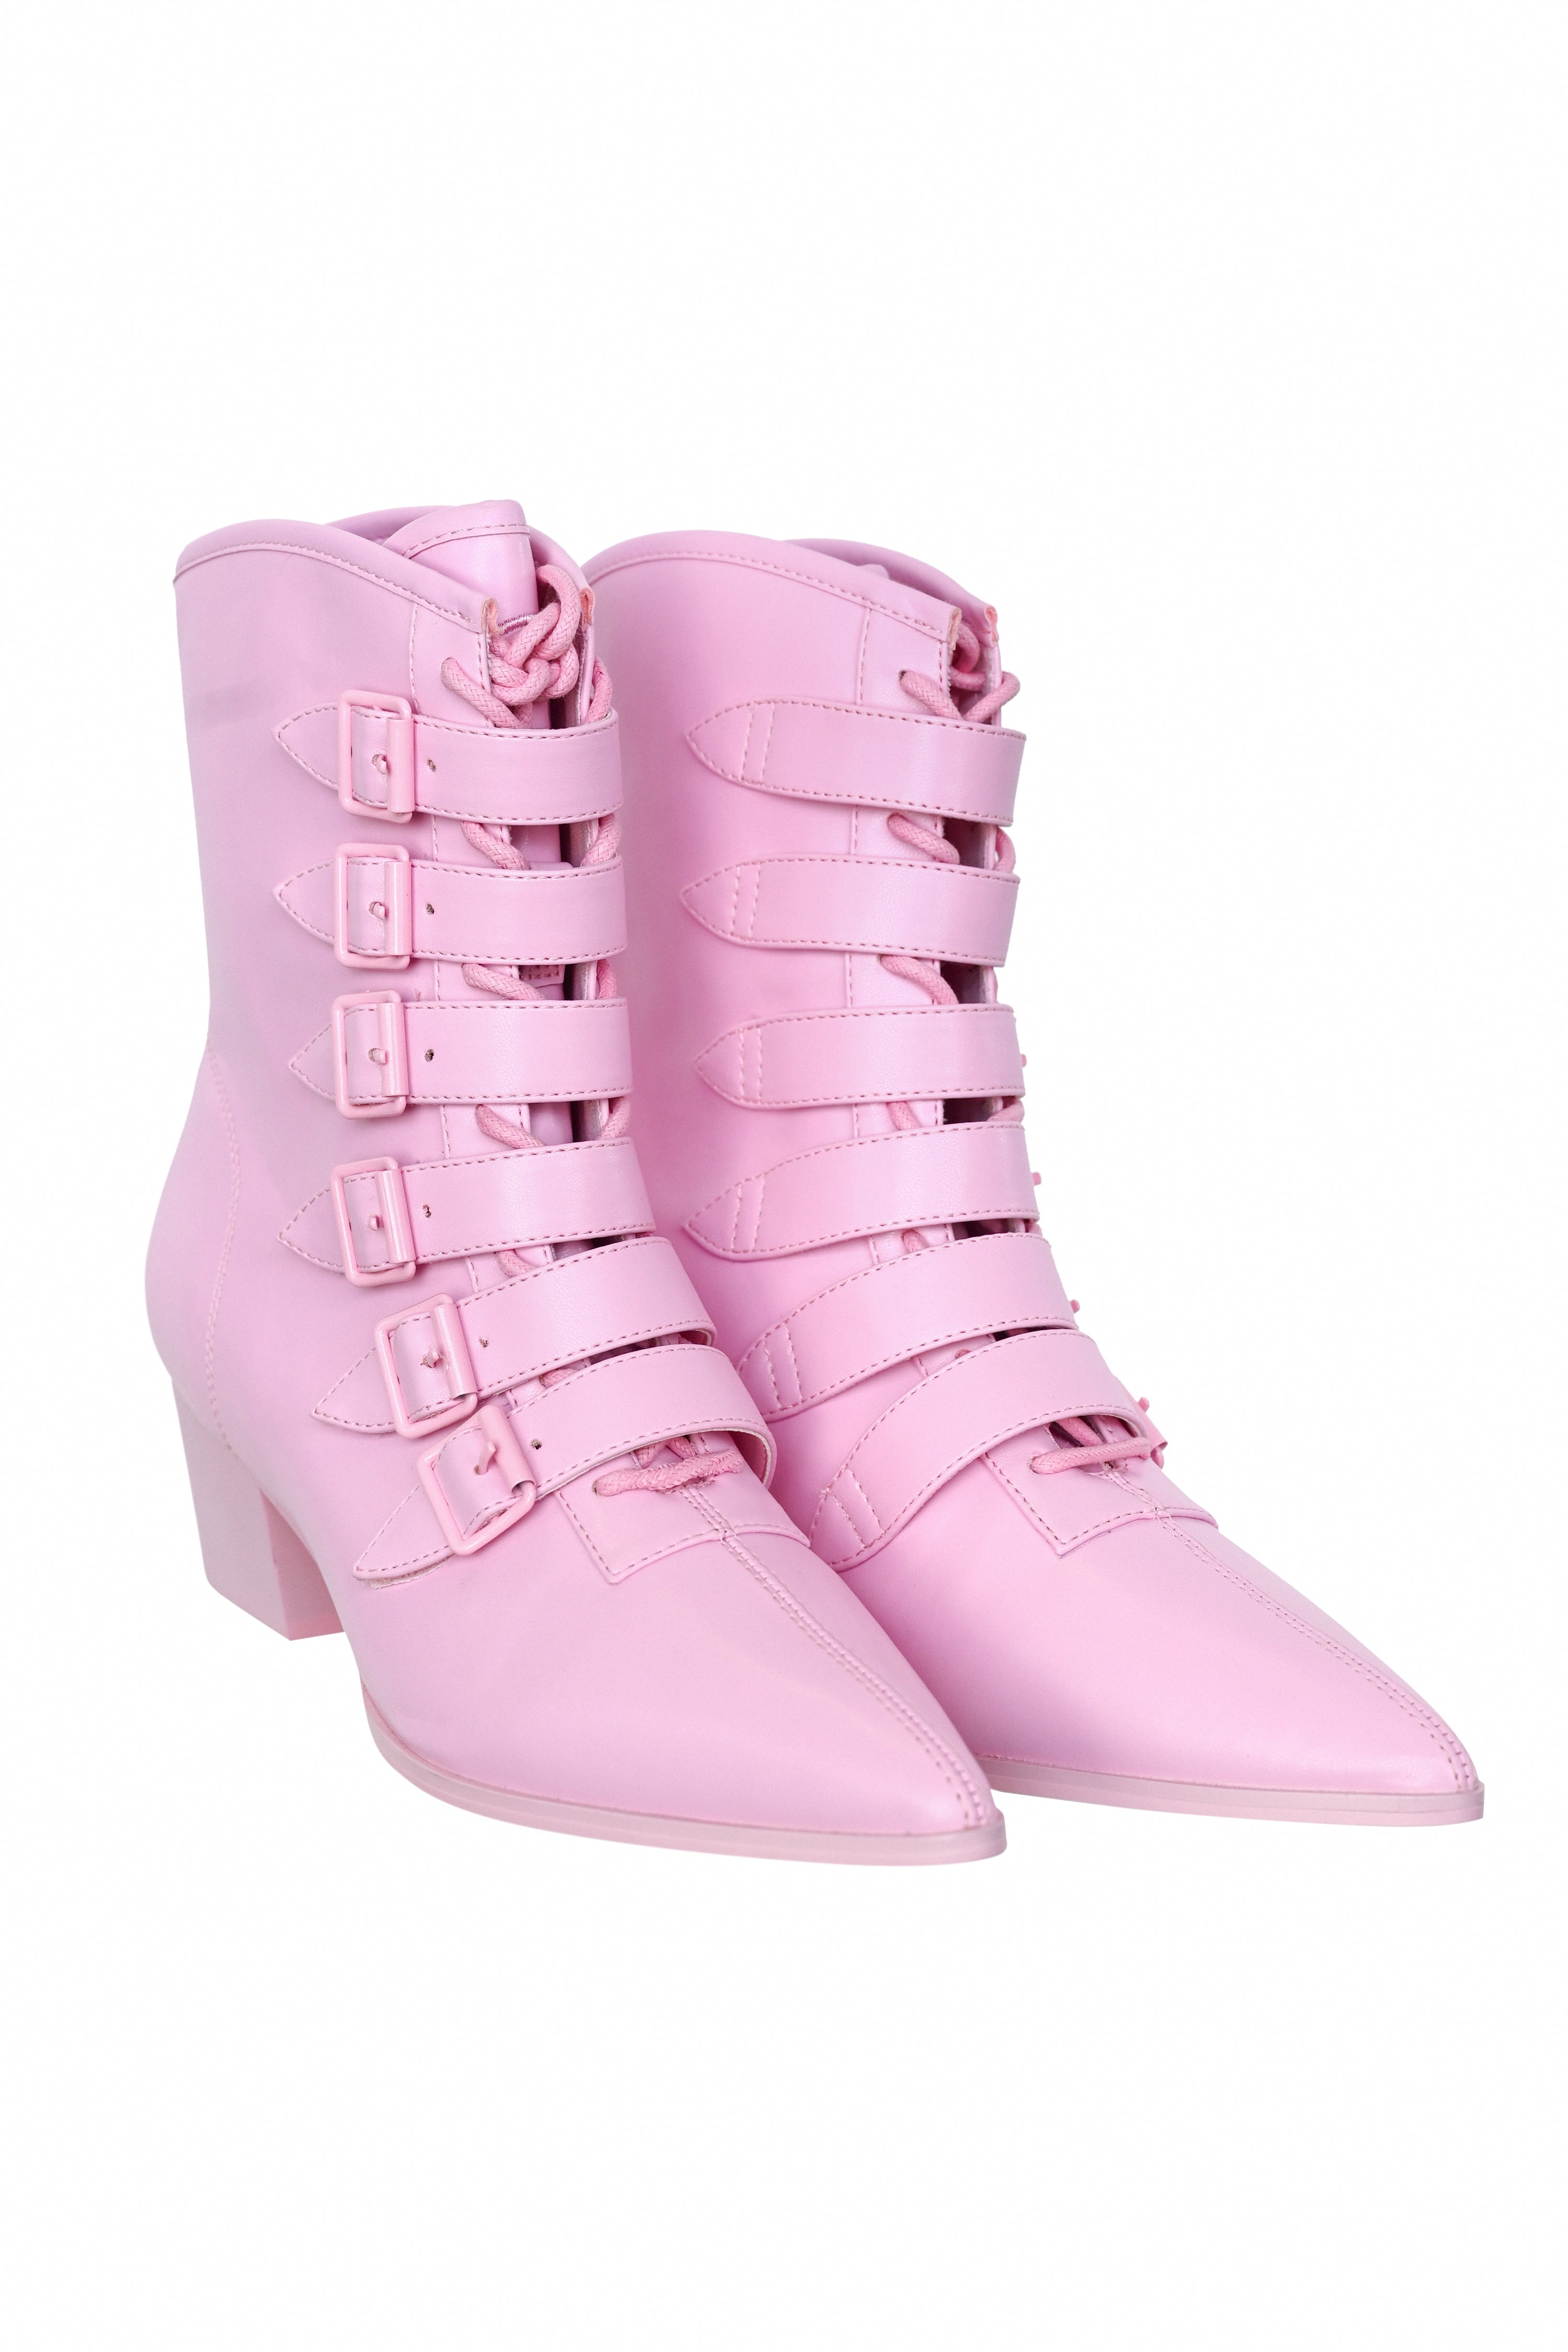 Candy Coven Strappy Boot - Size 5 left!